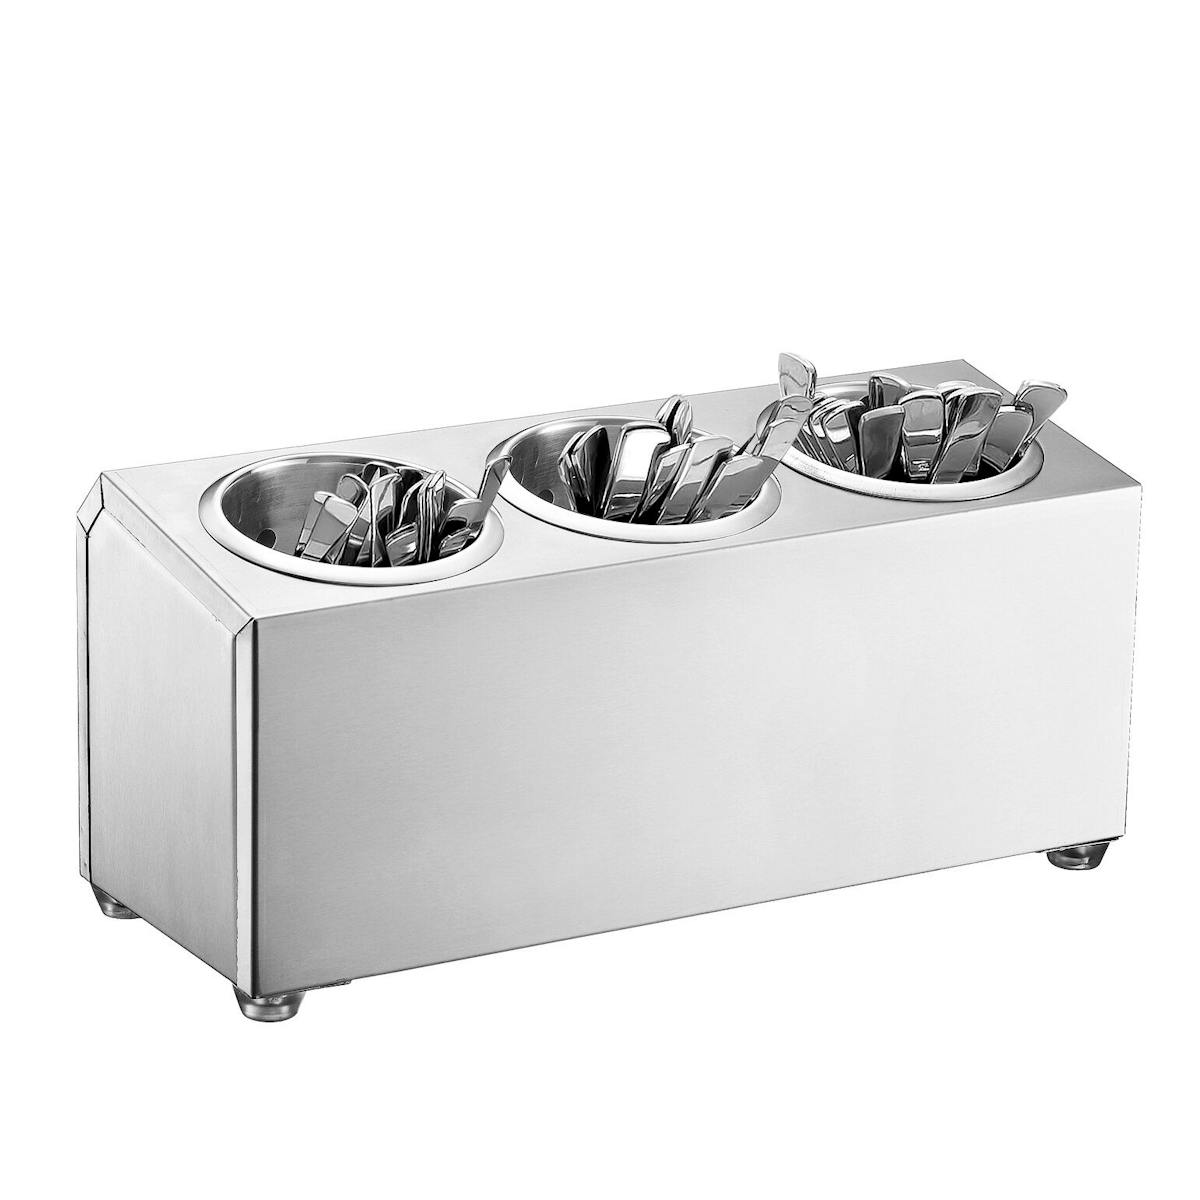 Cutlery tray - for 3 cutlery holders	